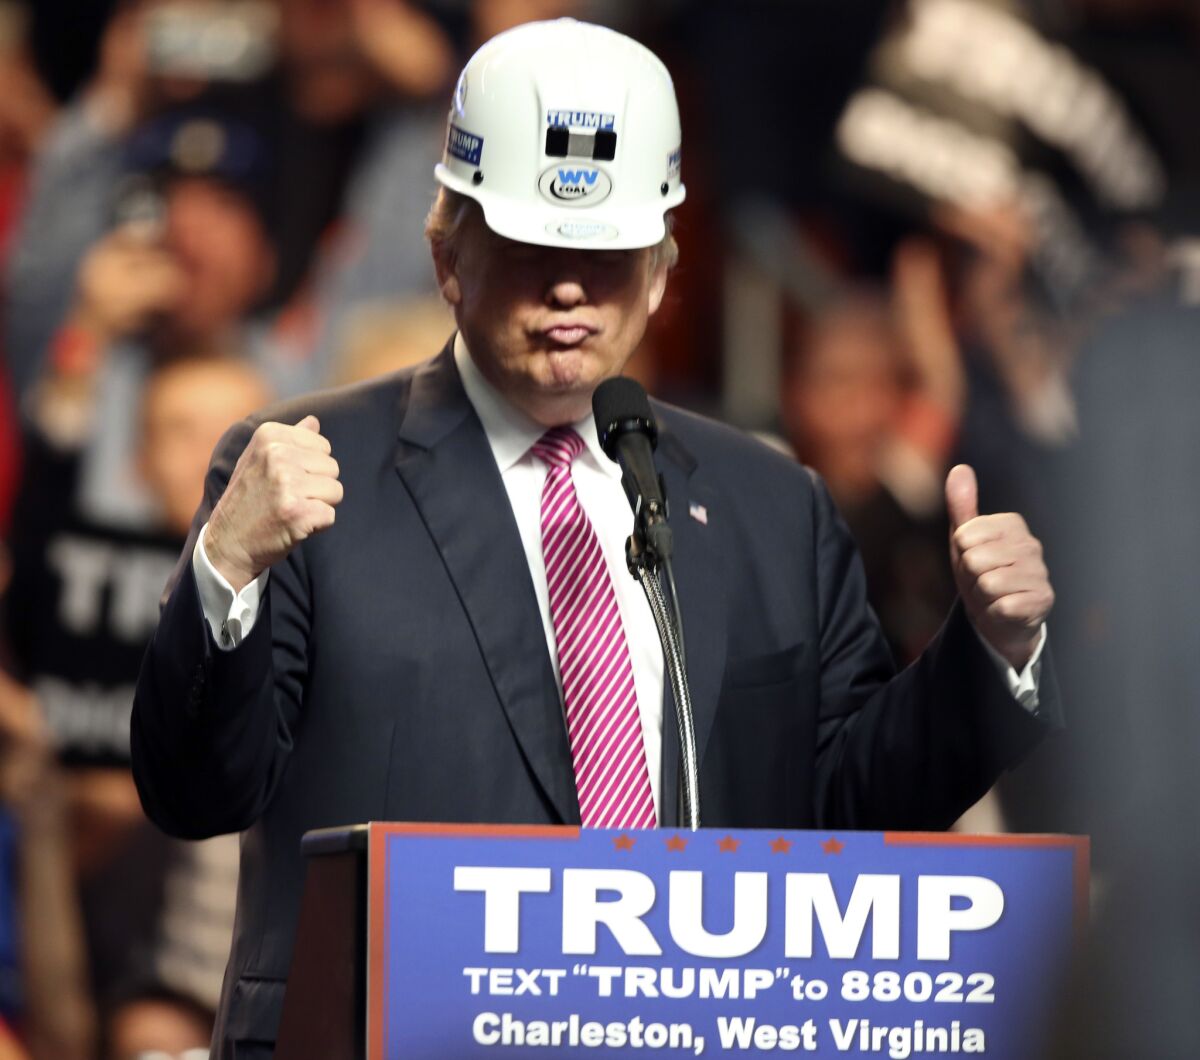 Republican presidential candidate Donald Trump puts on a miners' hard hat during a rally in Charleston, W.Va.